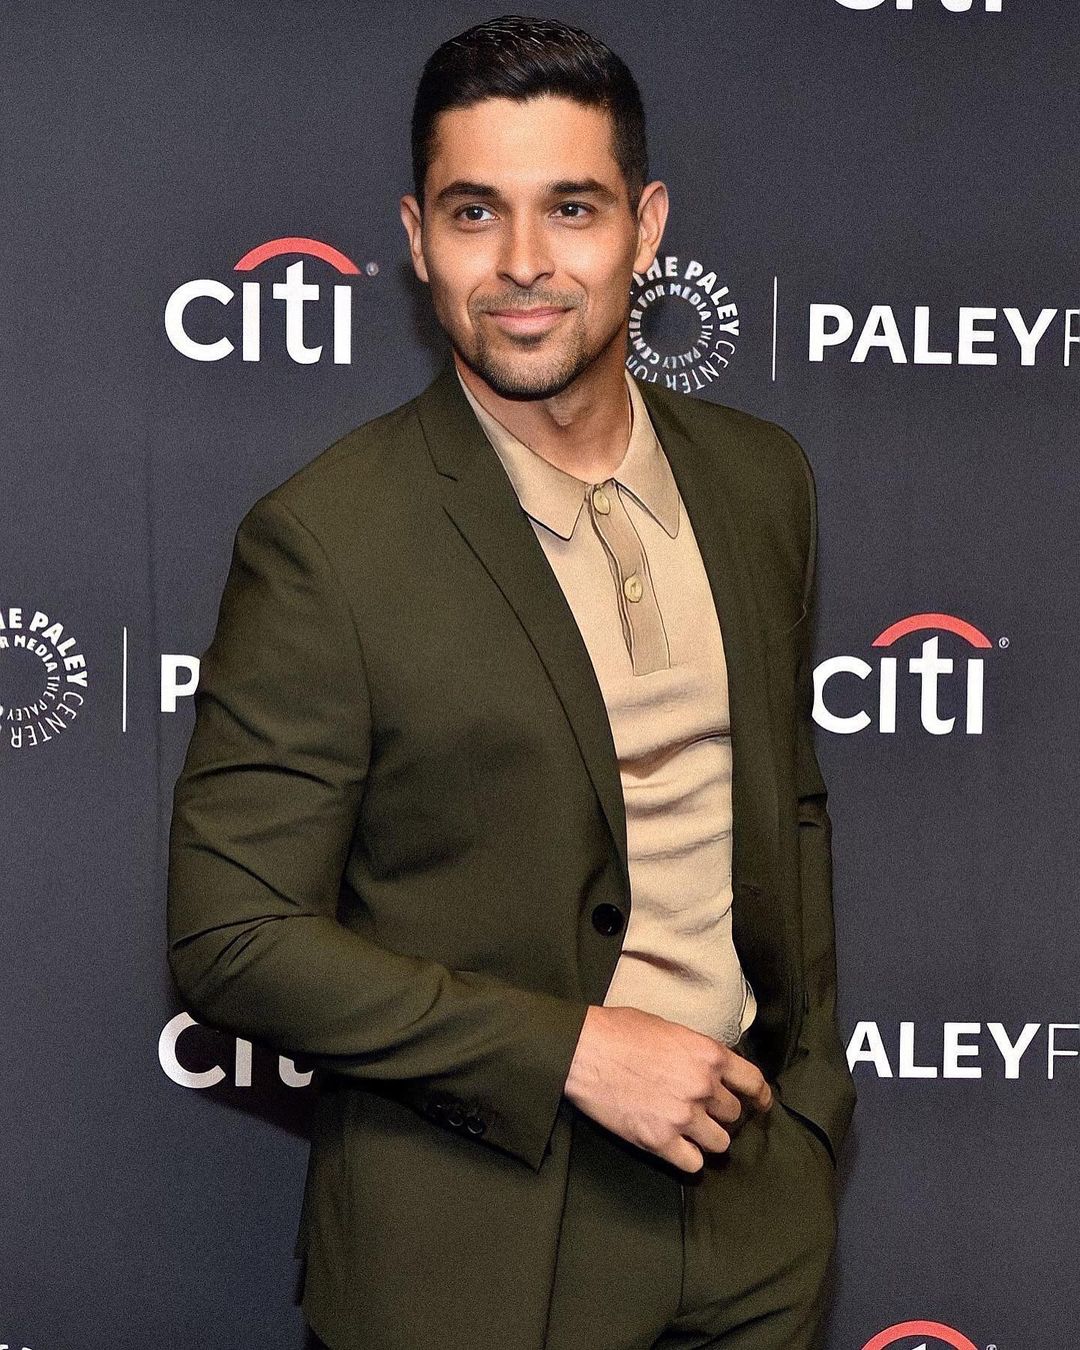 Wilmer Valderrama has been accused of being a pedophile for dating minors and grooming underage people